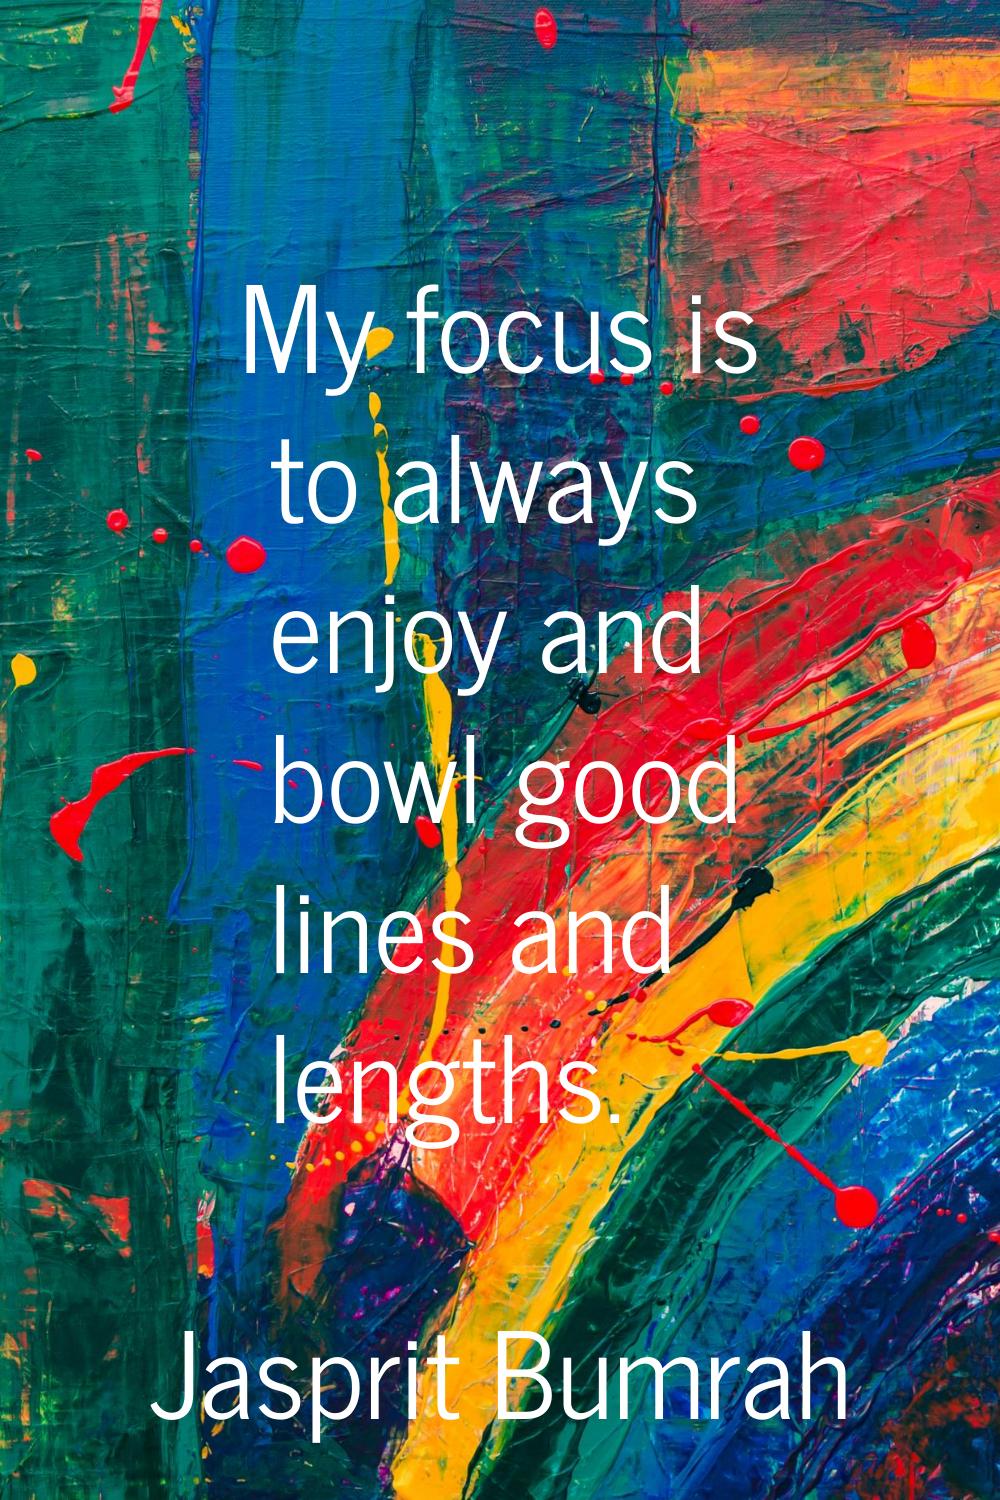 My focus is to always enjoy and bowl good lines and lengths.